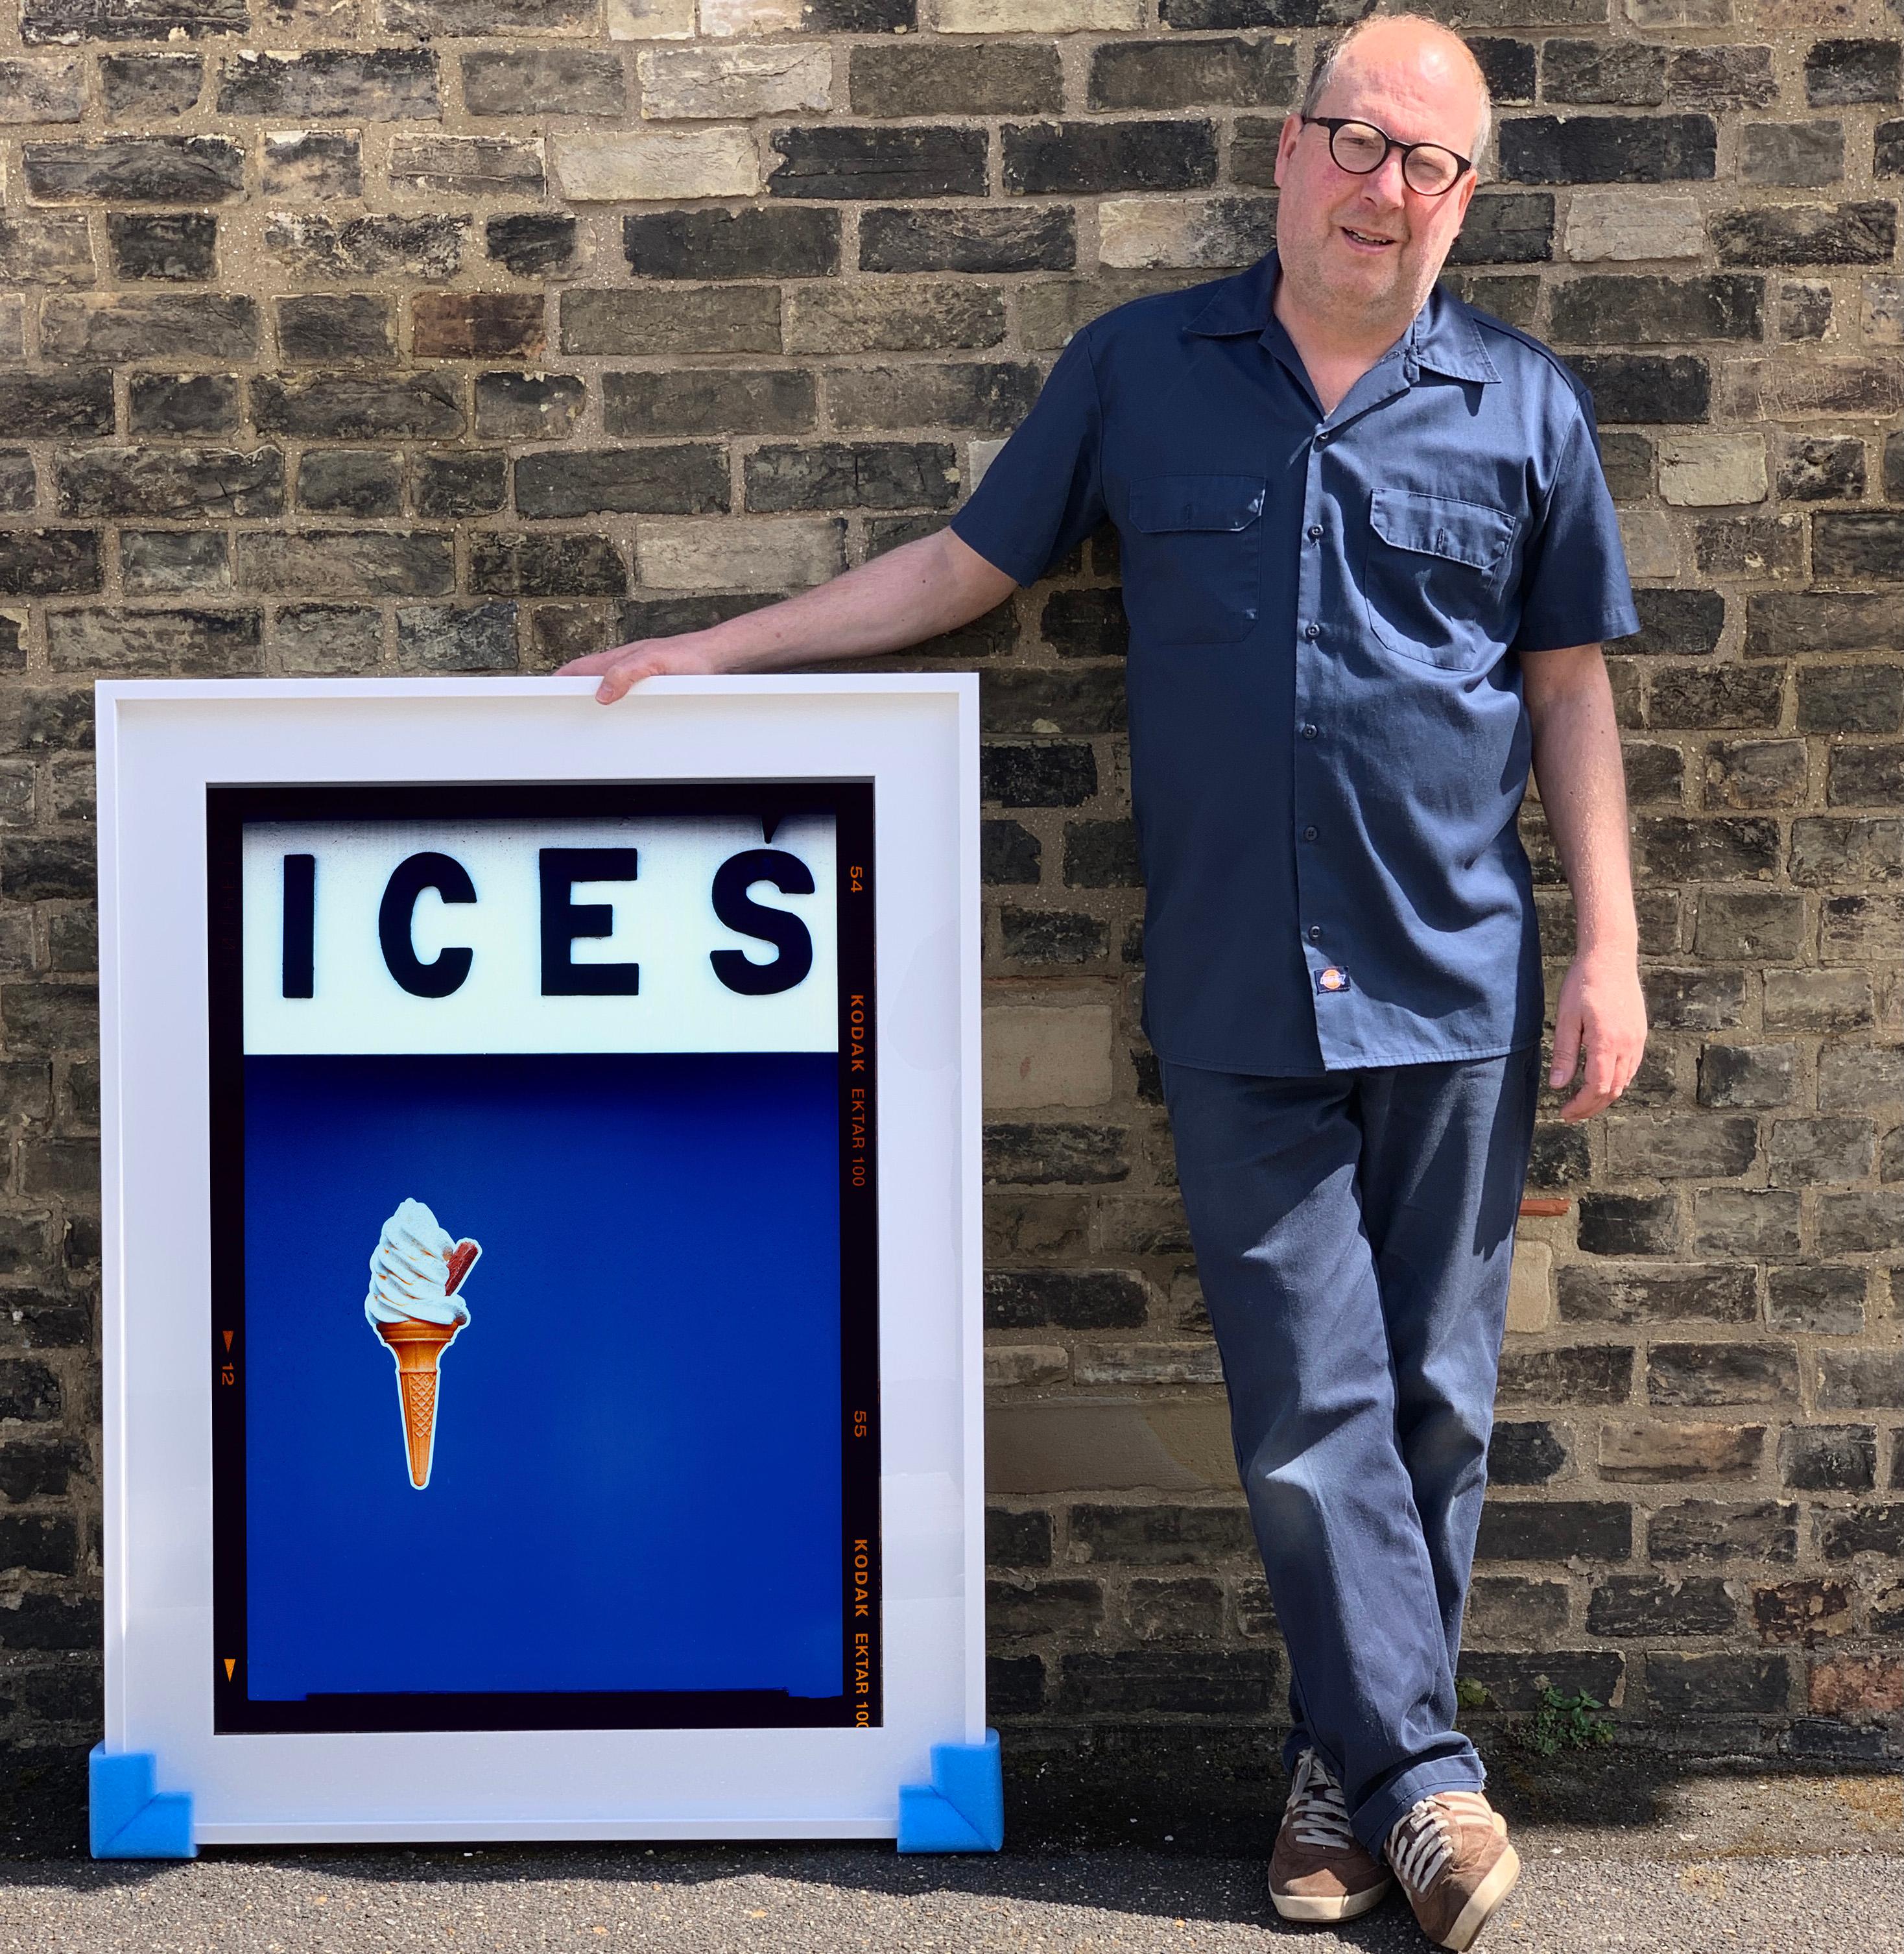 Ices, photographed at Bexhill-on-Sea. On one hand it's about the joys of the British seaside, the iconic ice cream cone, it's incredibly simple but on the somehow its created a conceptual piece of art, the ice cream cone suspended in a sea of blue